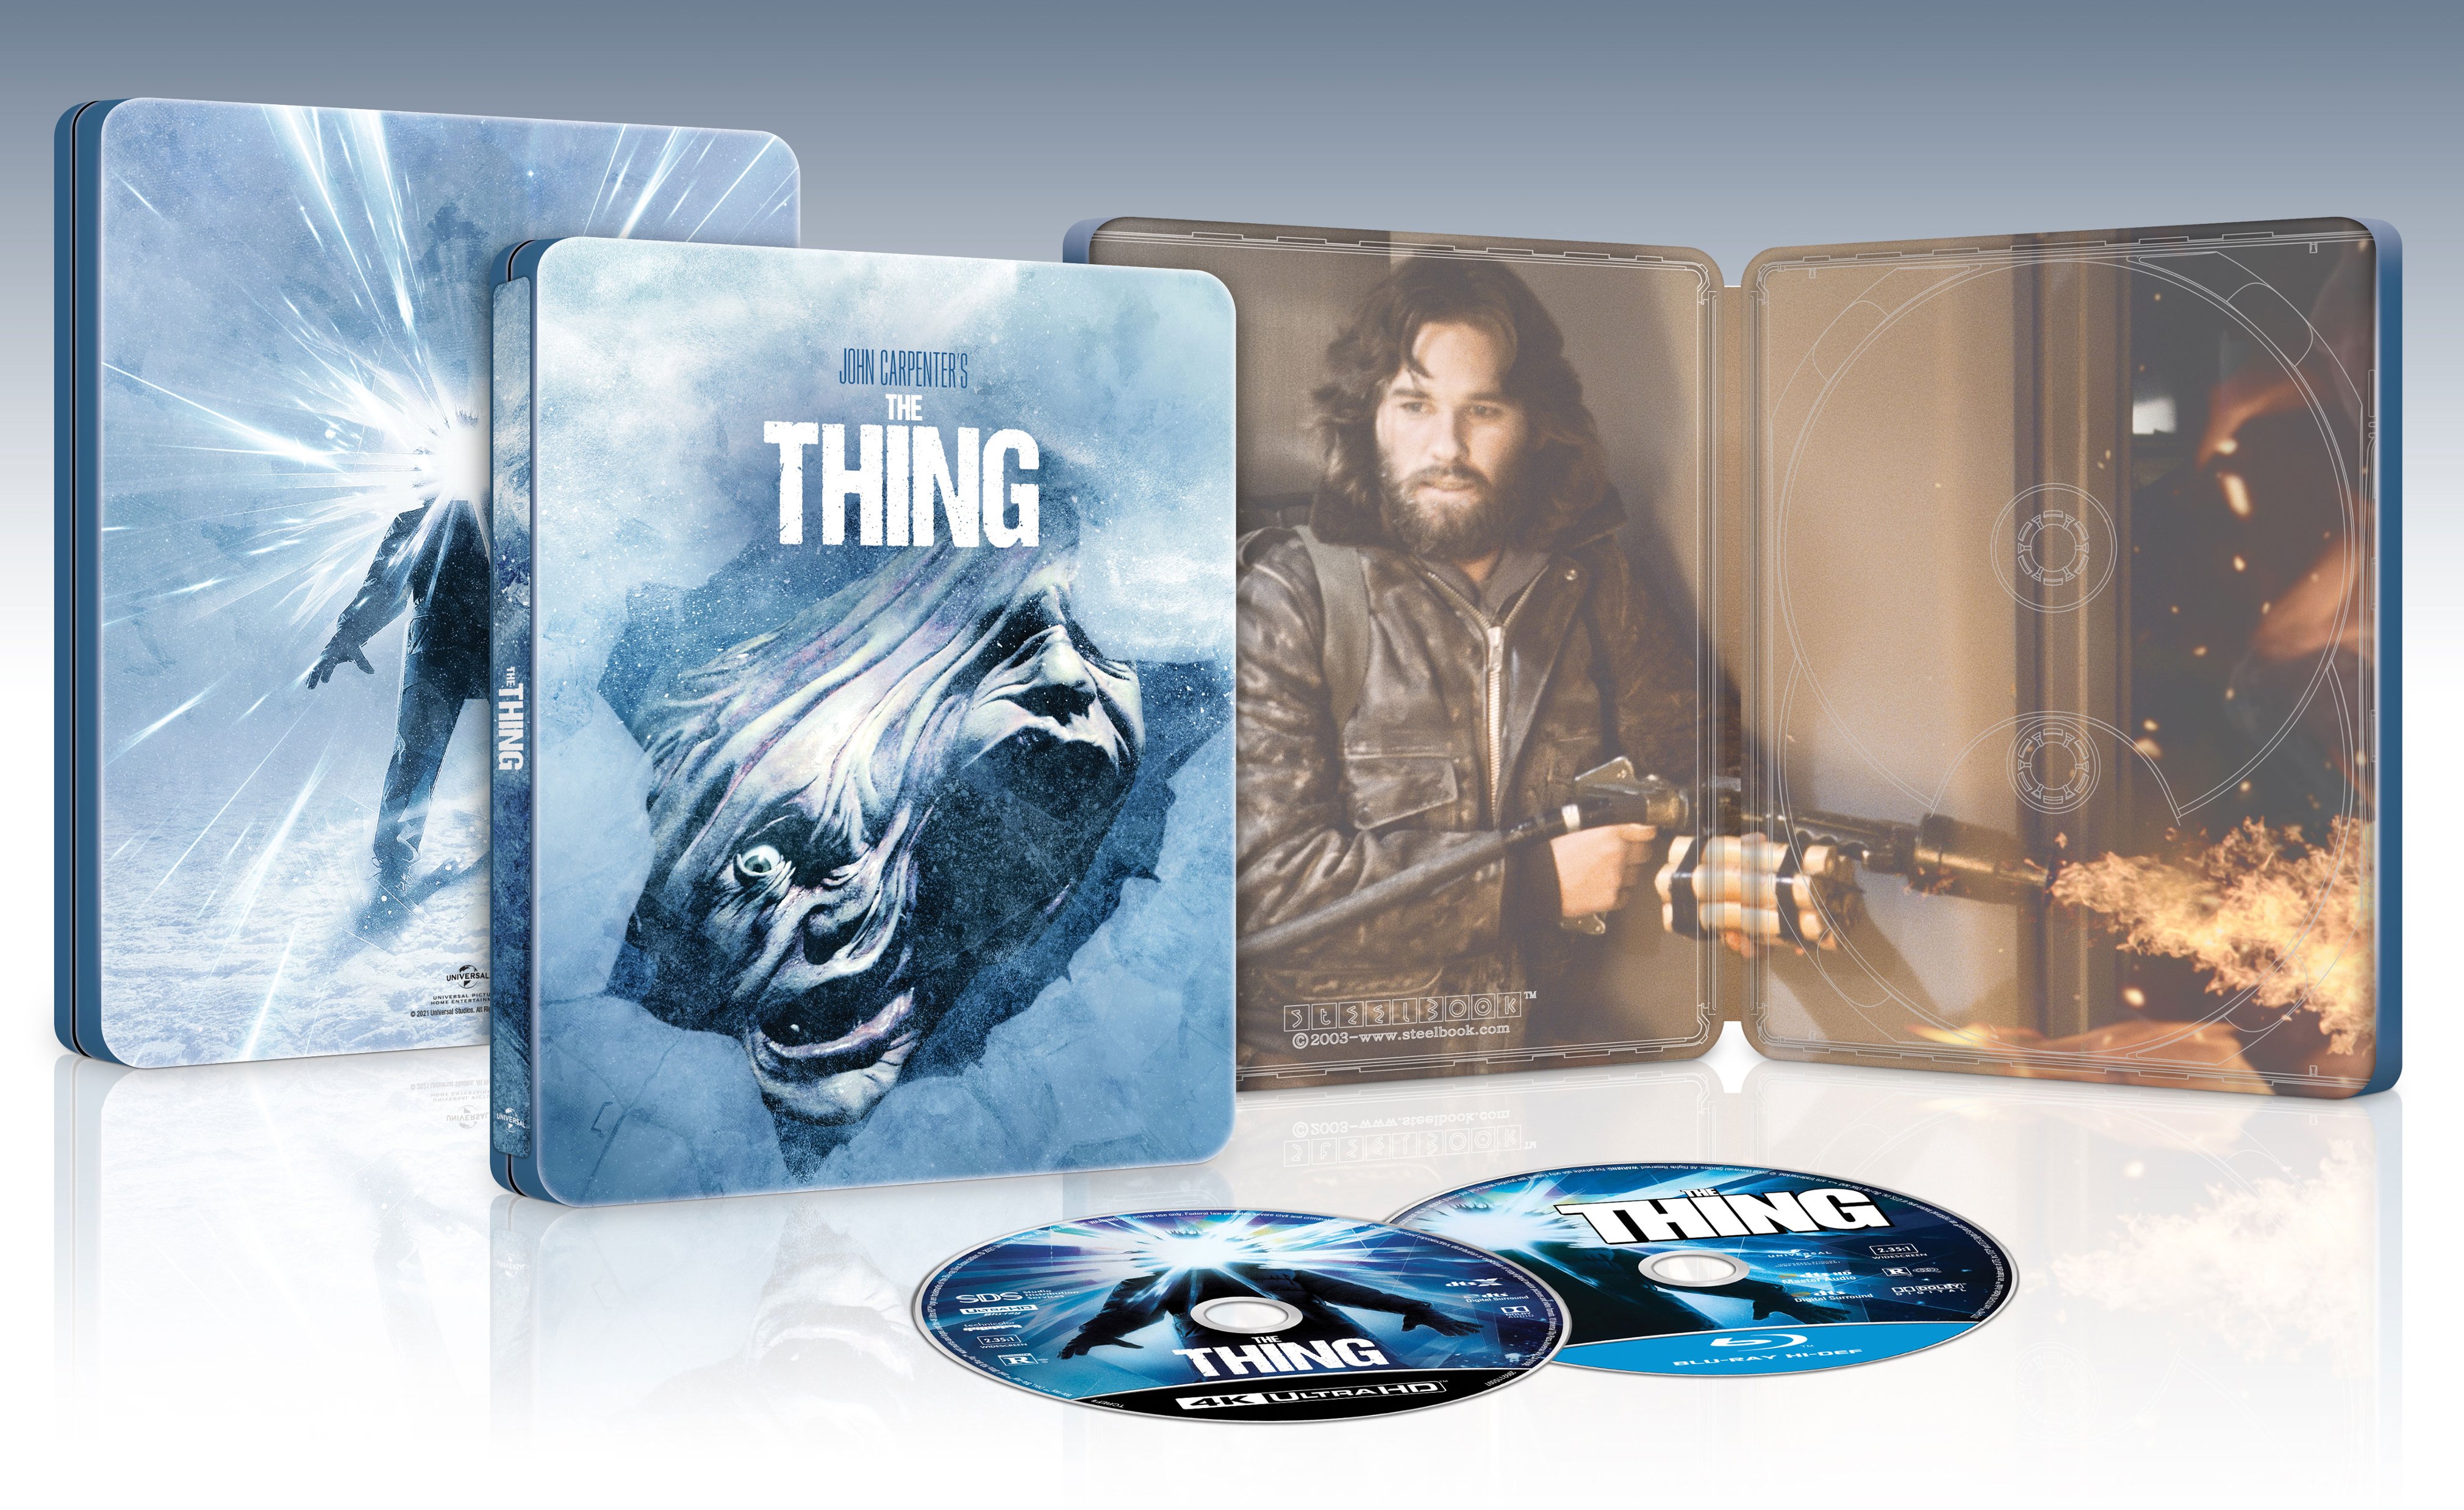 The Thing (1982) (4K+2D Blu-ray SteelBook) (Best Buy Exclusive) USA Page 5 ...